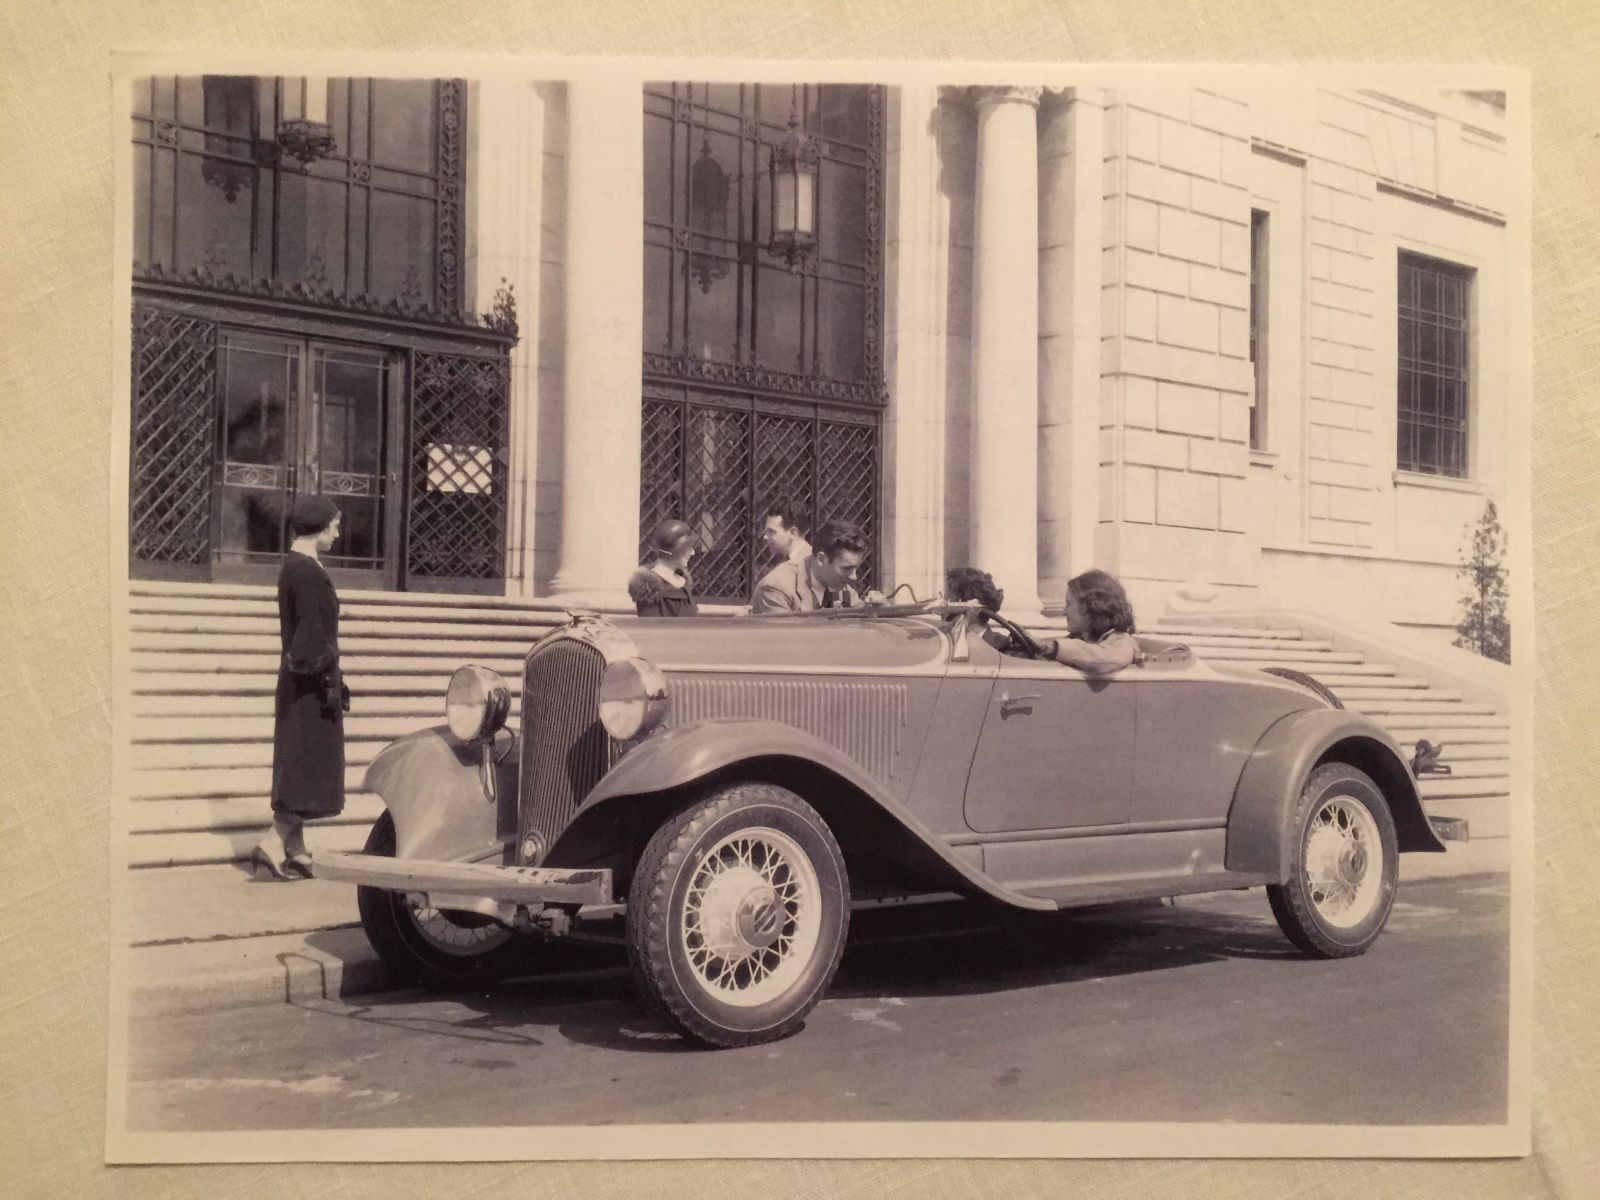 1932 Plymouth PB Sports Roadster in front of the Woodward Avenue entrance to the DIA